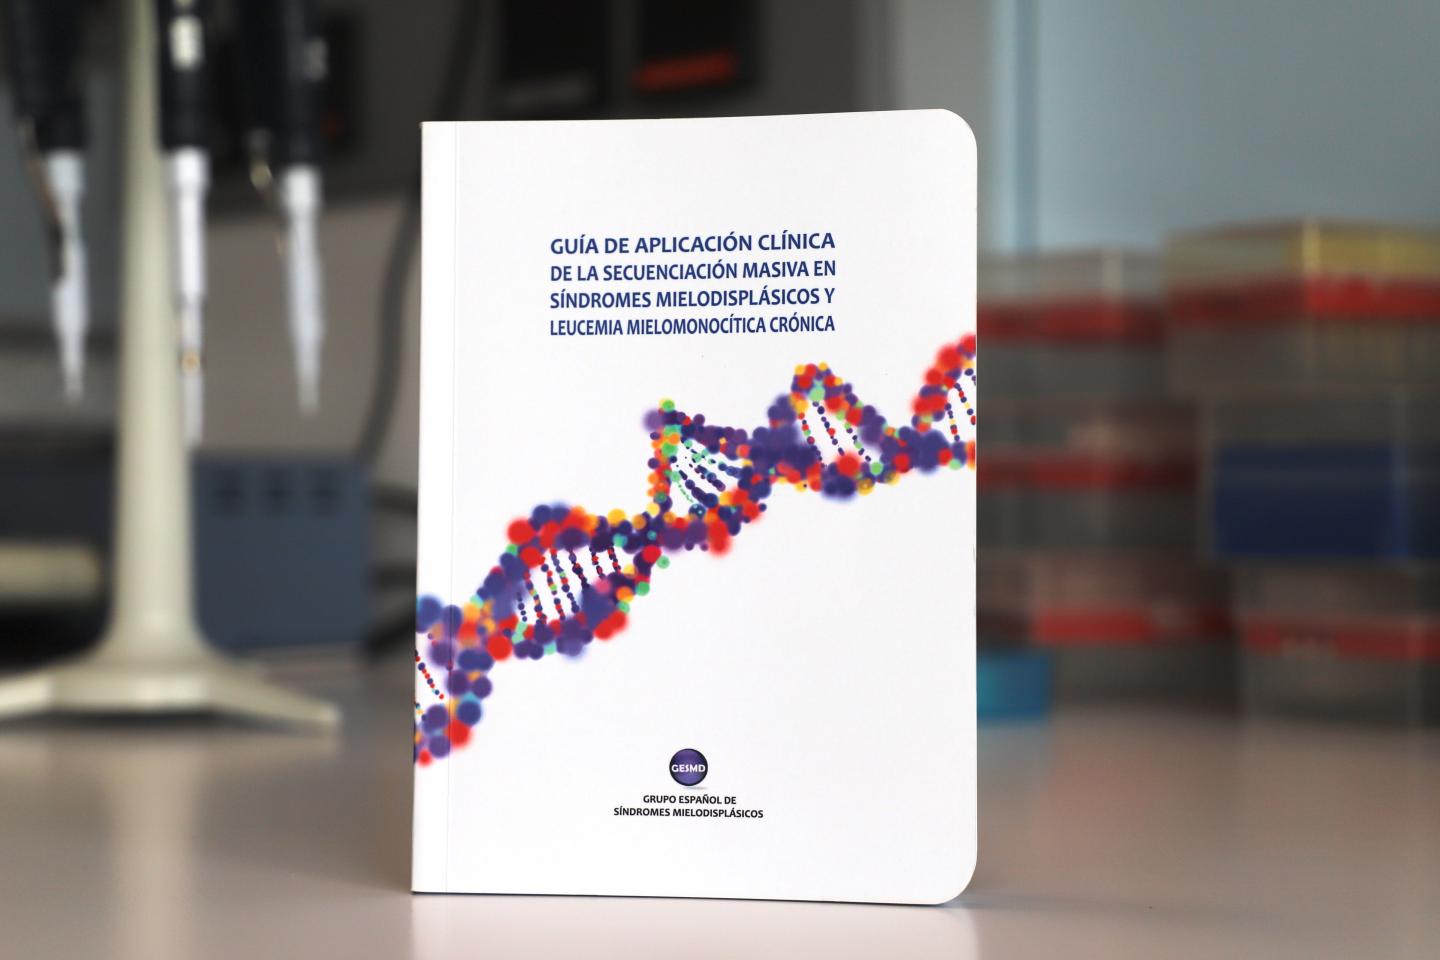 Guide Book of Clinical Application of Massive Sequencing for Mielodisplastic Syndromes